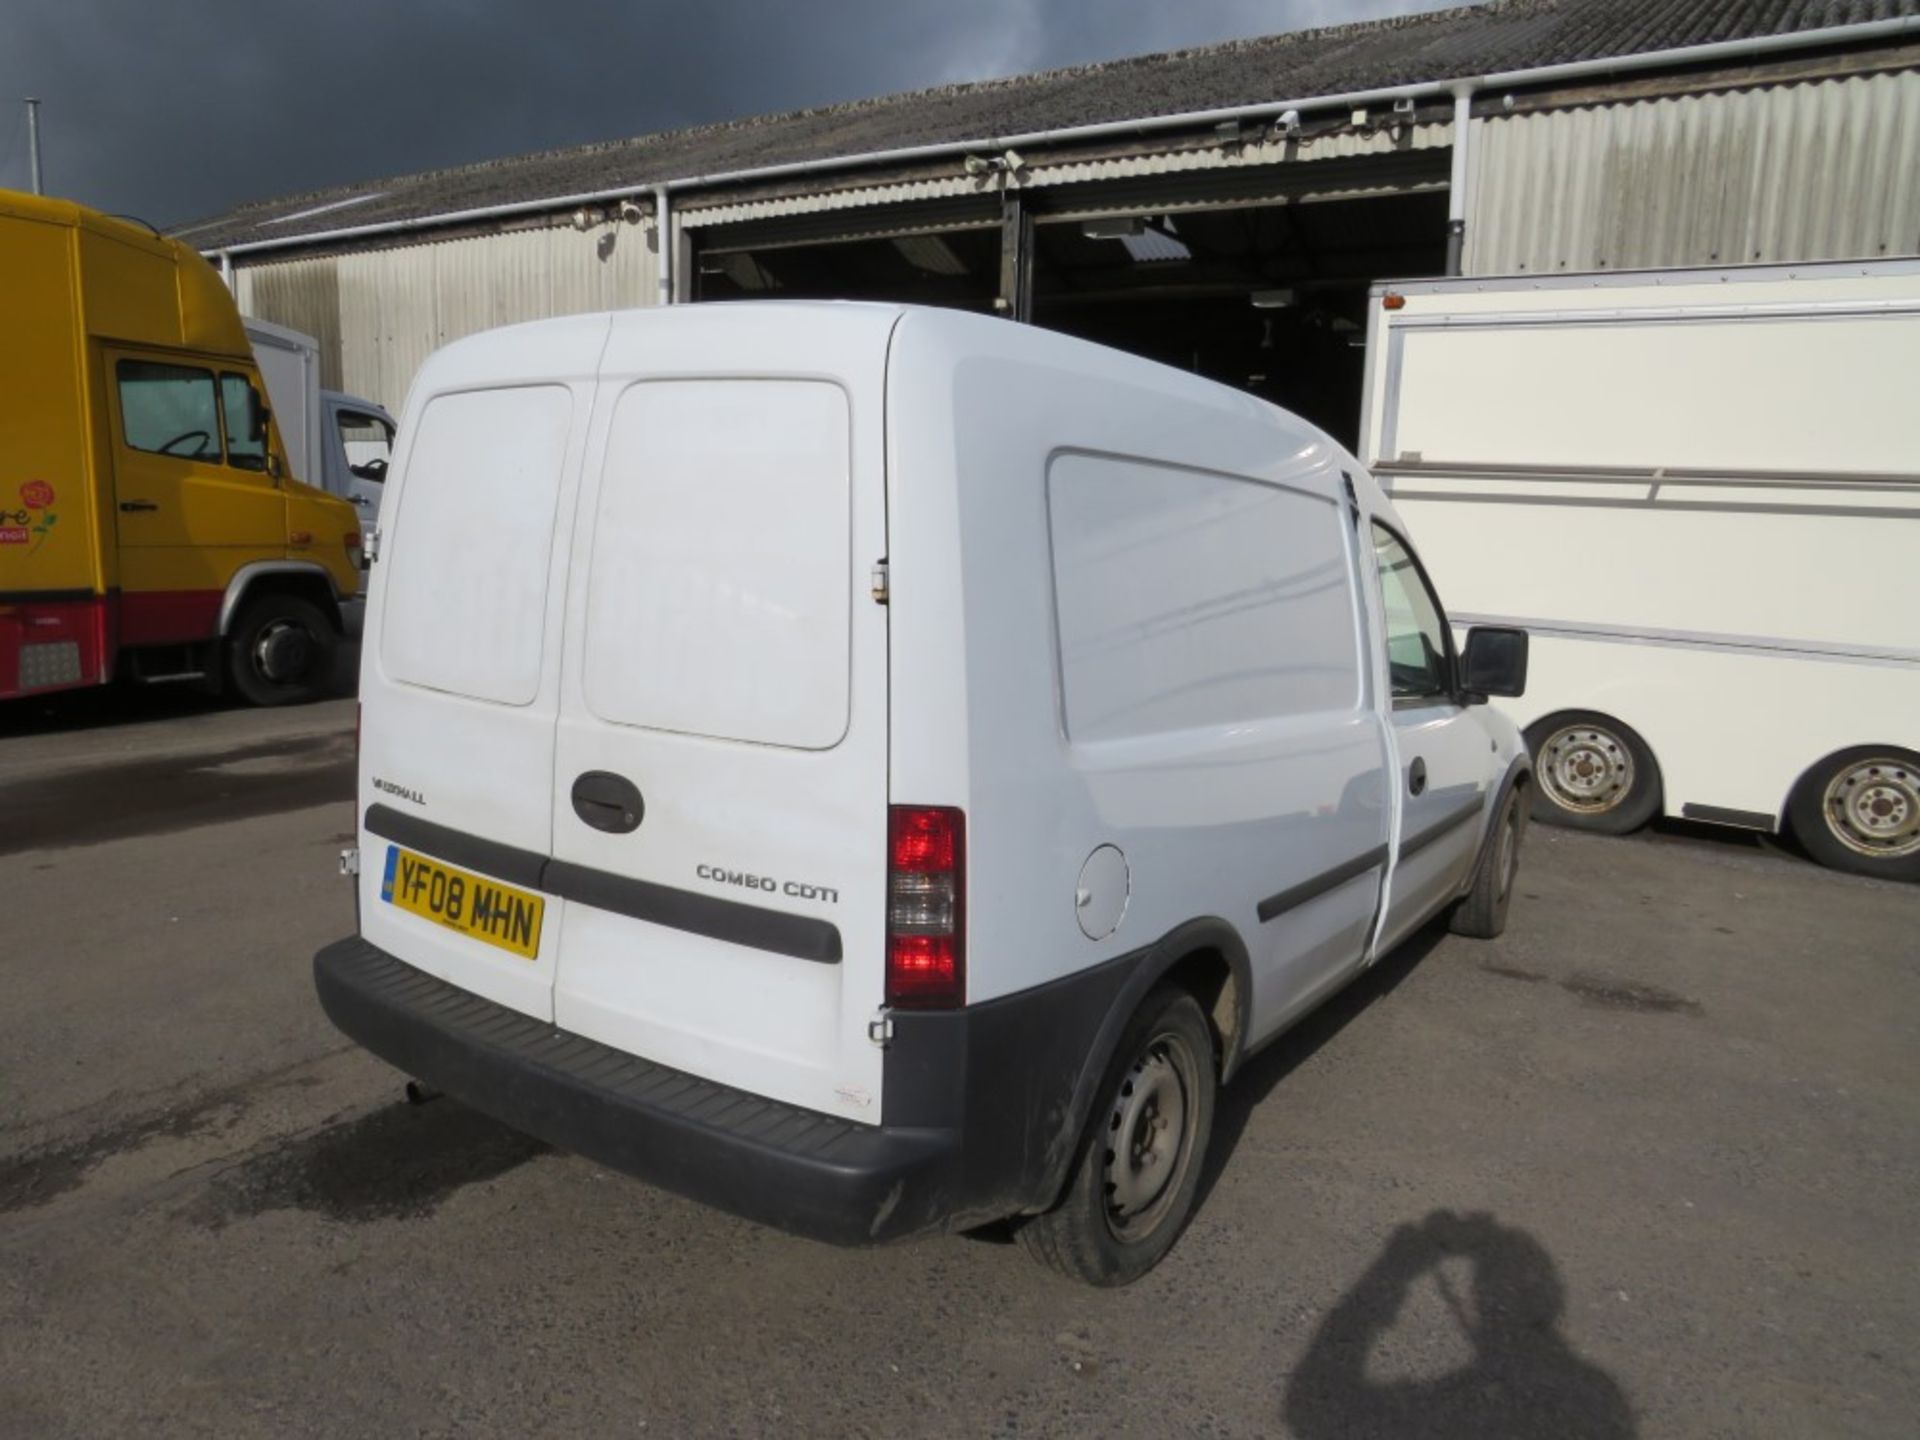 08 reg VAUXHALL COMBO 1700 CDTI, 1ST REG 04/08, TEST 05/20, 181171M, V5 HERE, 3 FORMER KEEPERS [NO - Image 4 of 6